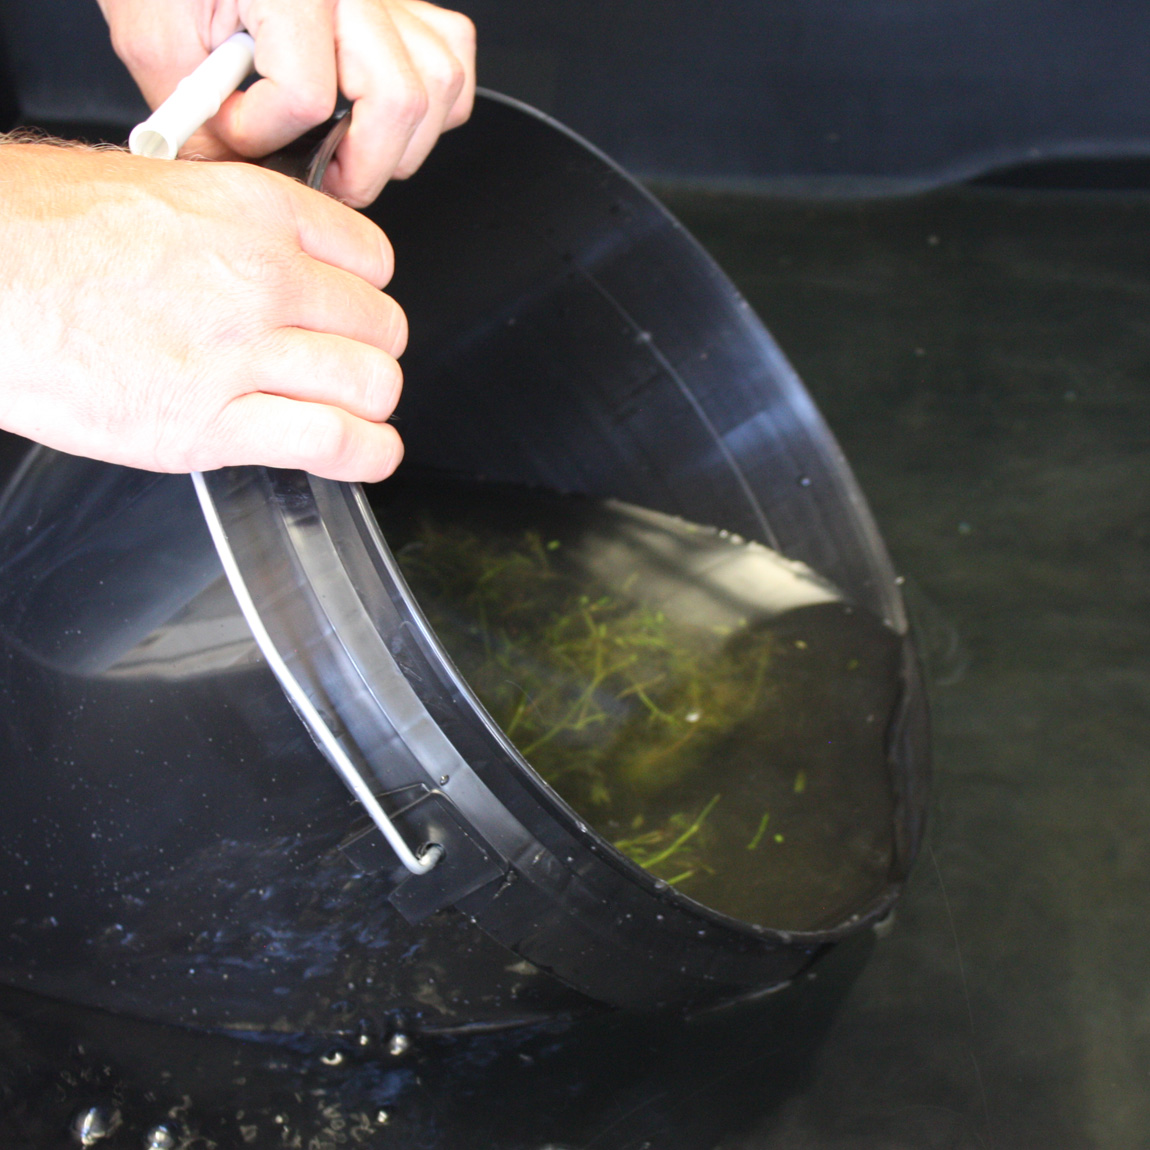 The big moment when the carp eggs entered the rearing programme.